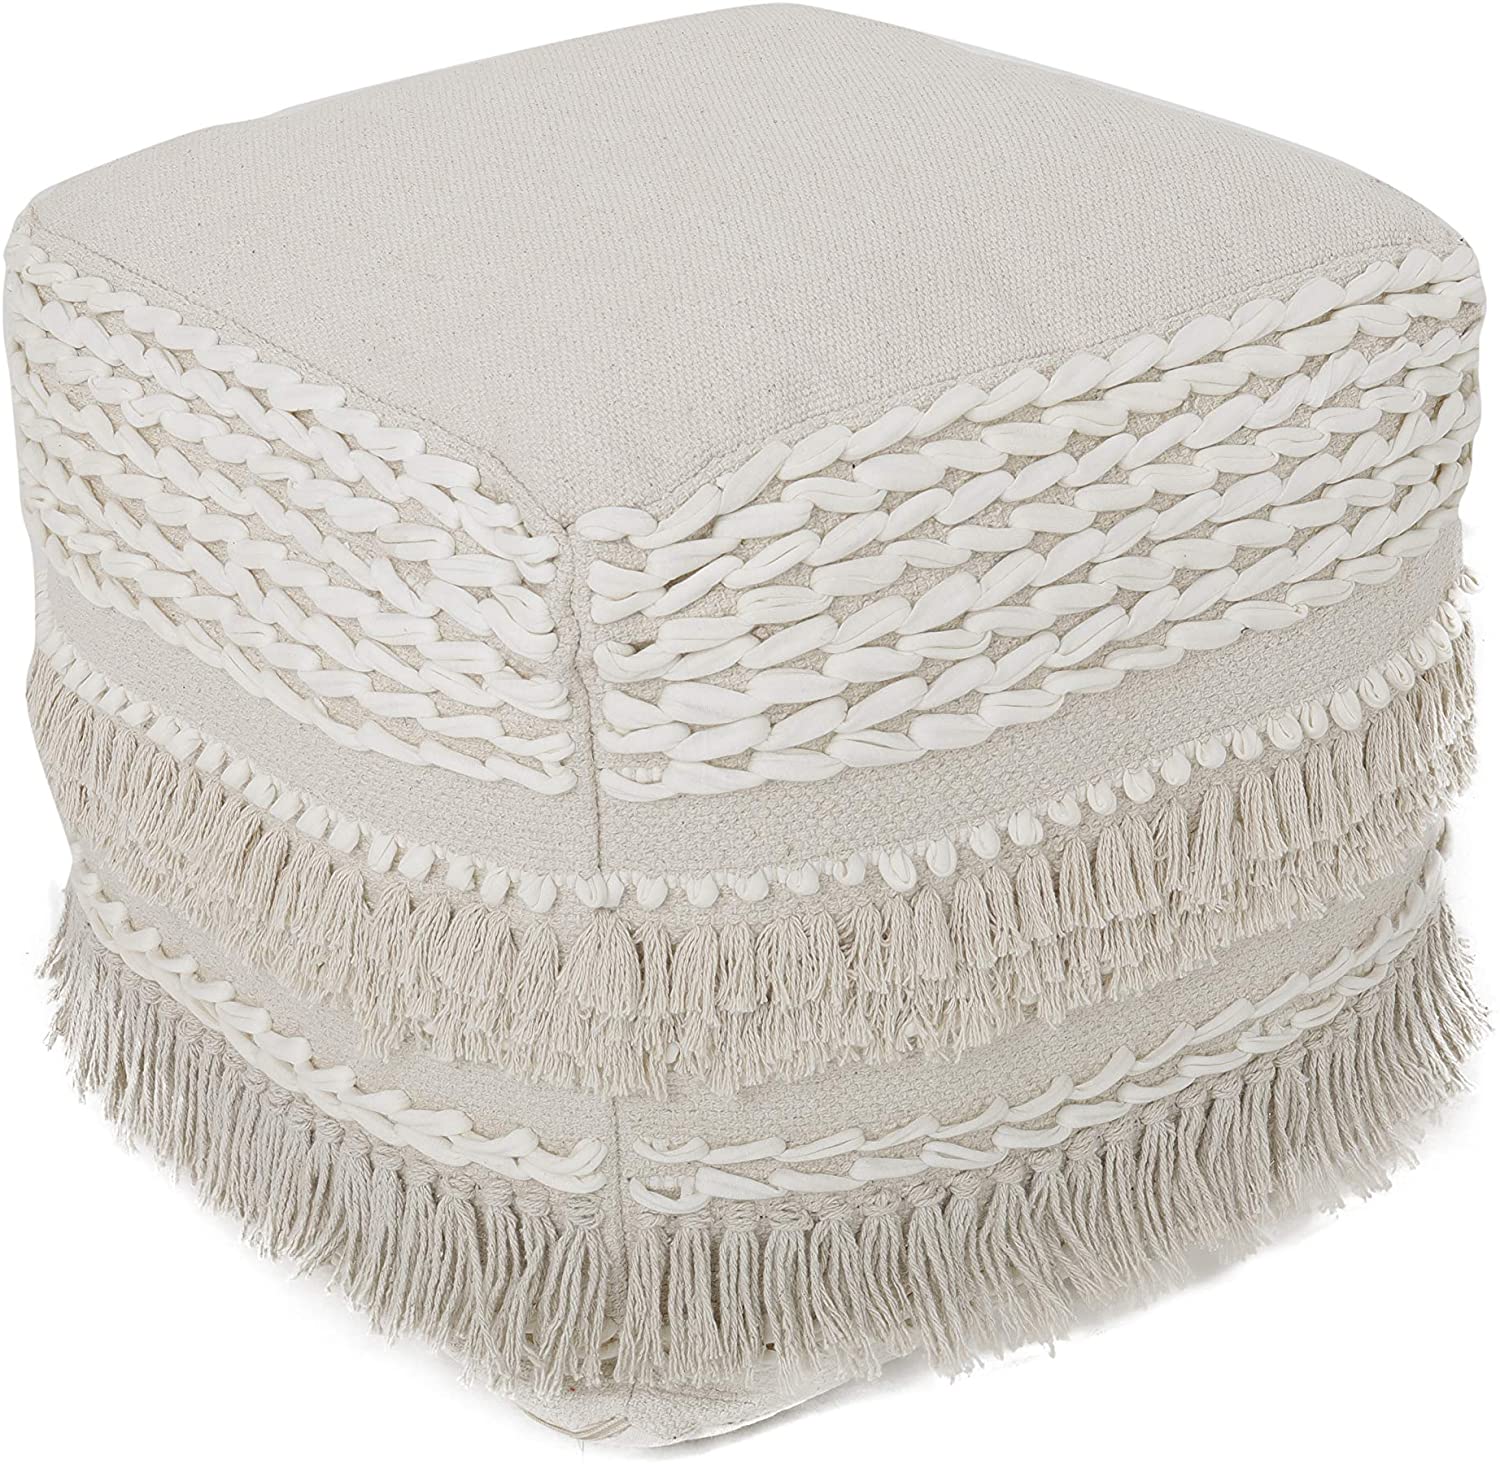 light beige cube pouf with tassles and decorative stitching